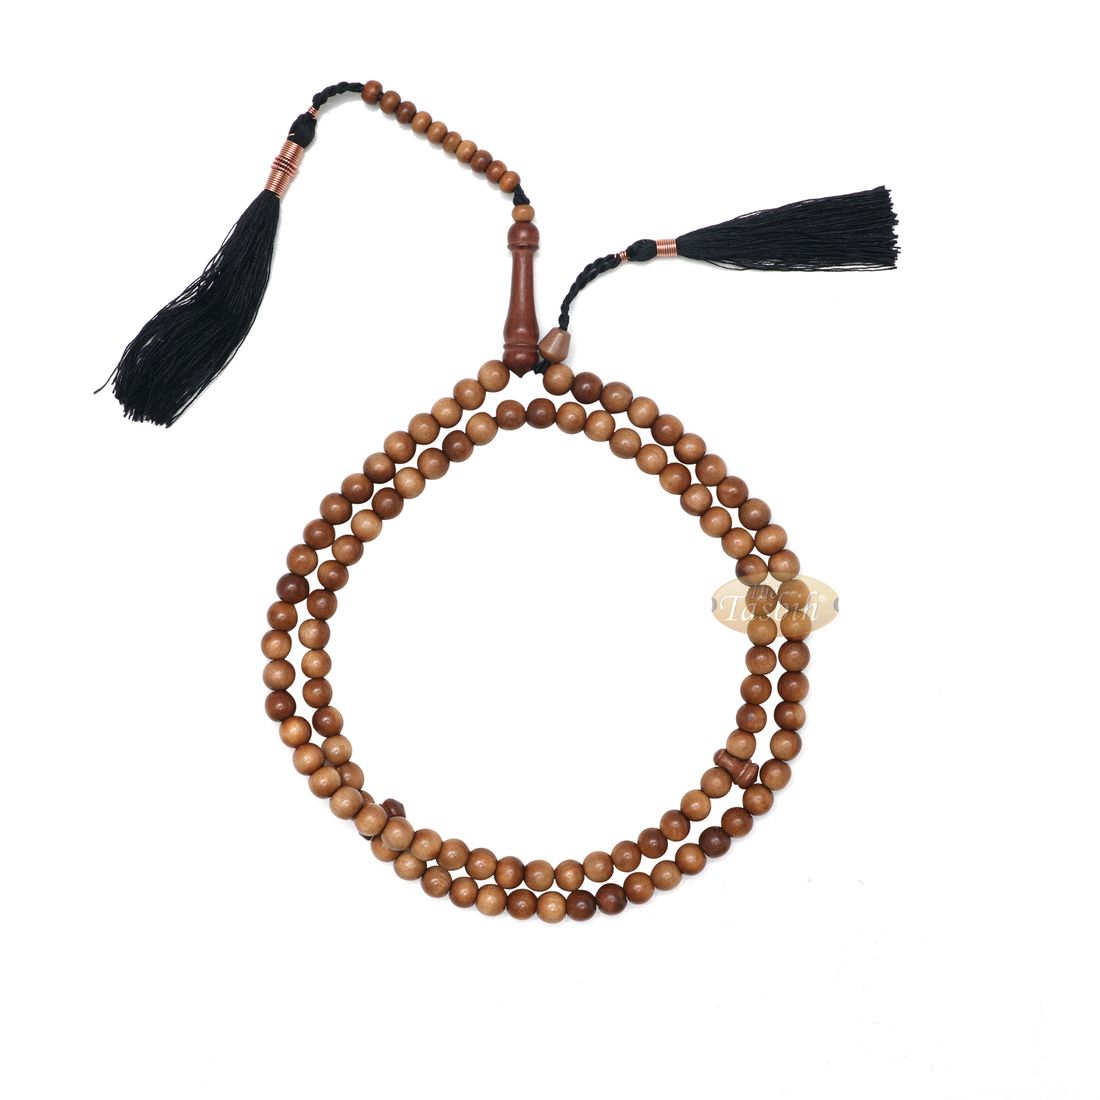 Naturally-dyed 8mm Ironwood Prayer Beads 99-bead Copper wire Tassel